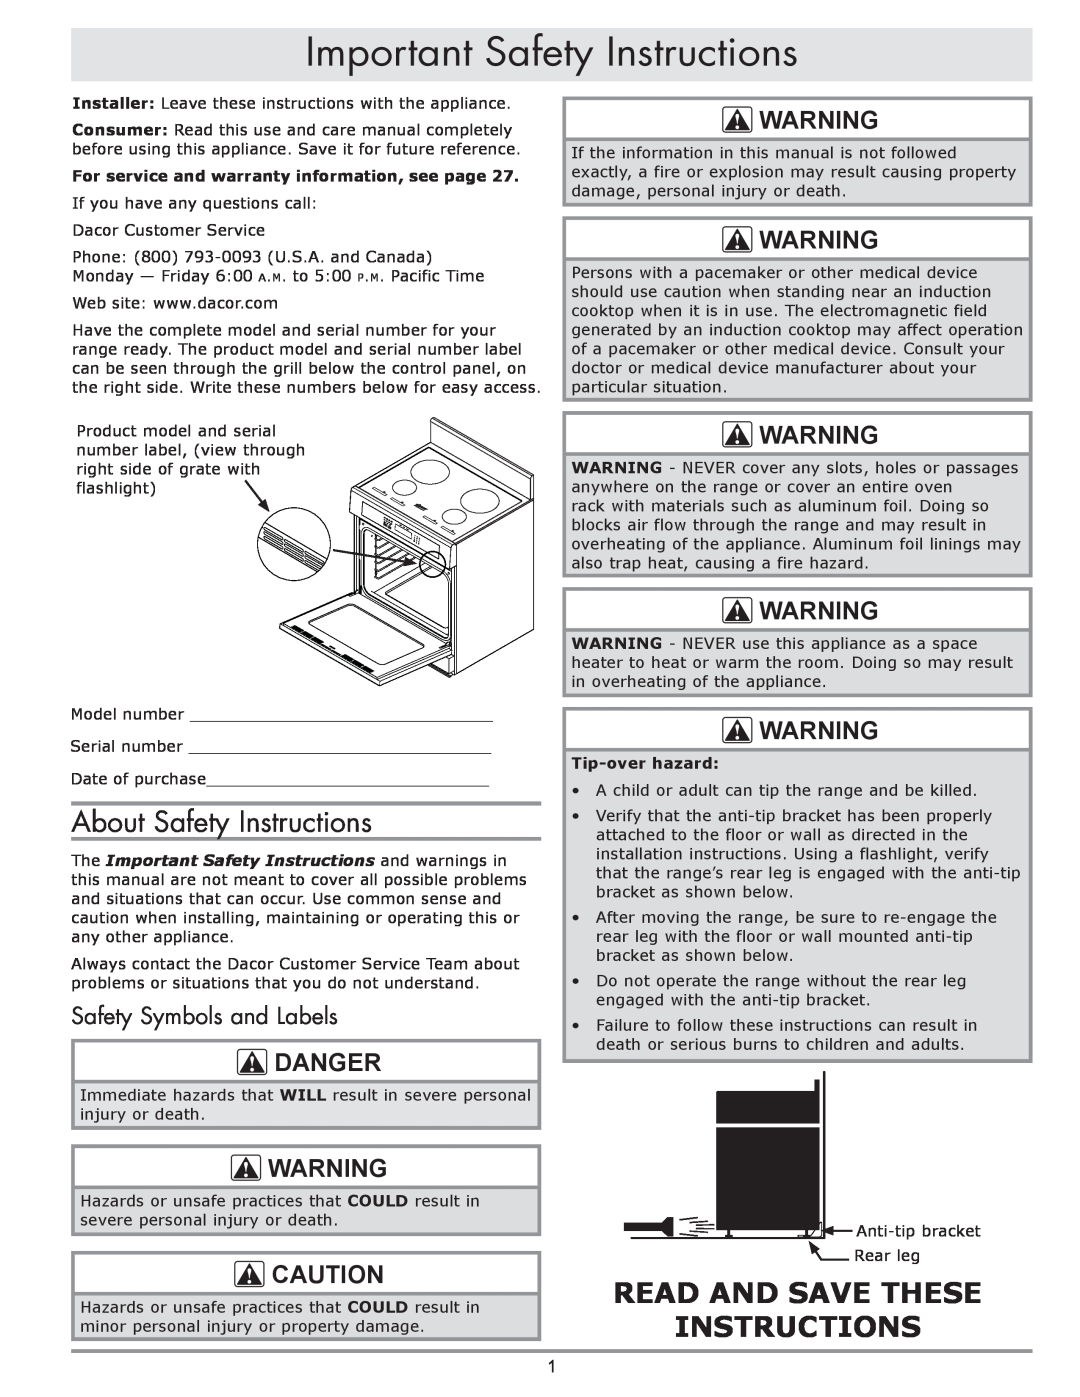 Dacor dacor Important Safety Instructions, About Safety Instructions, danger, Safety Symbols and Labels 